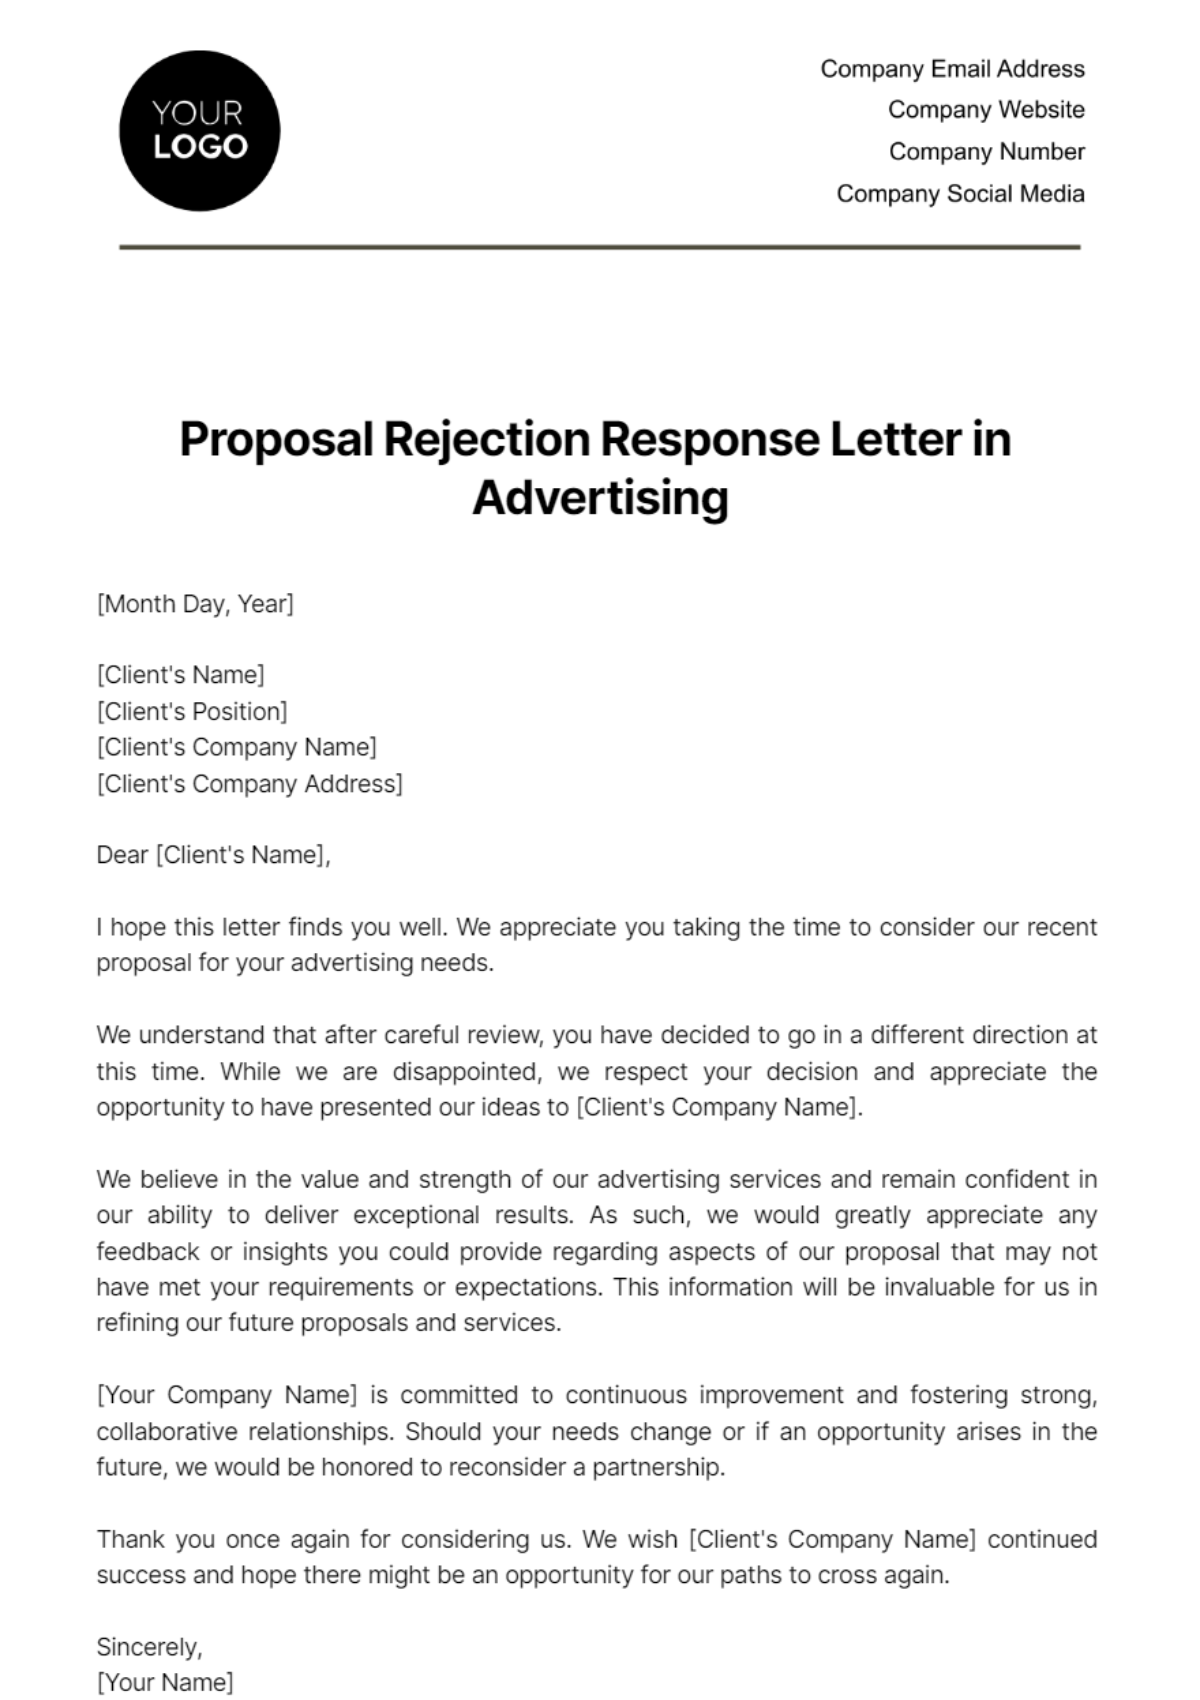 Free Proposal Rejection Response Letter in Advertising Template